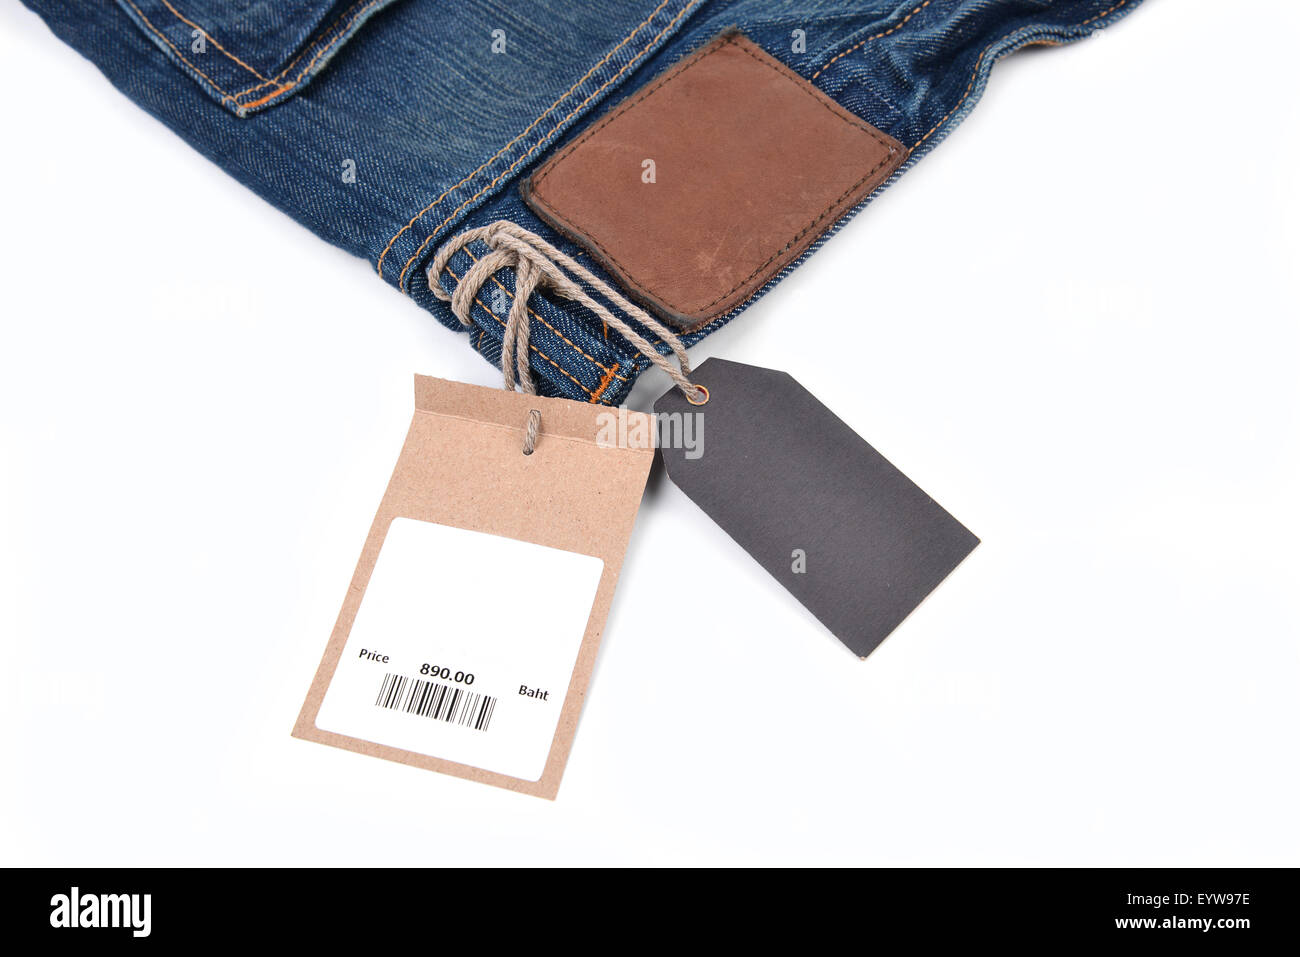 price tag with barcode on jeans textured Stock Photo - Alamy